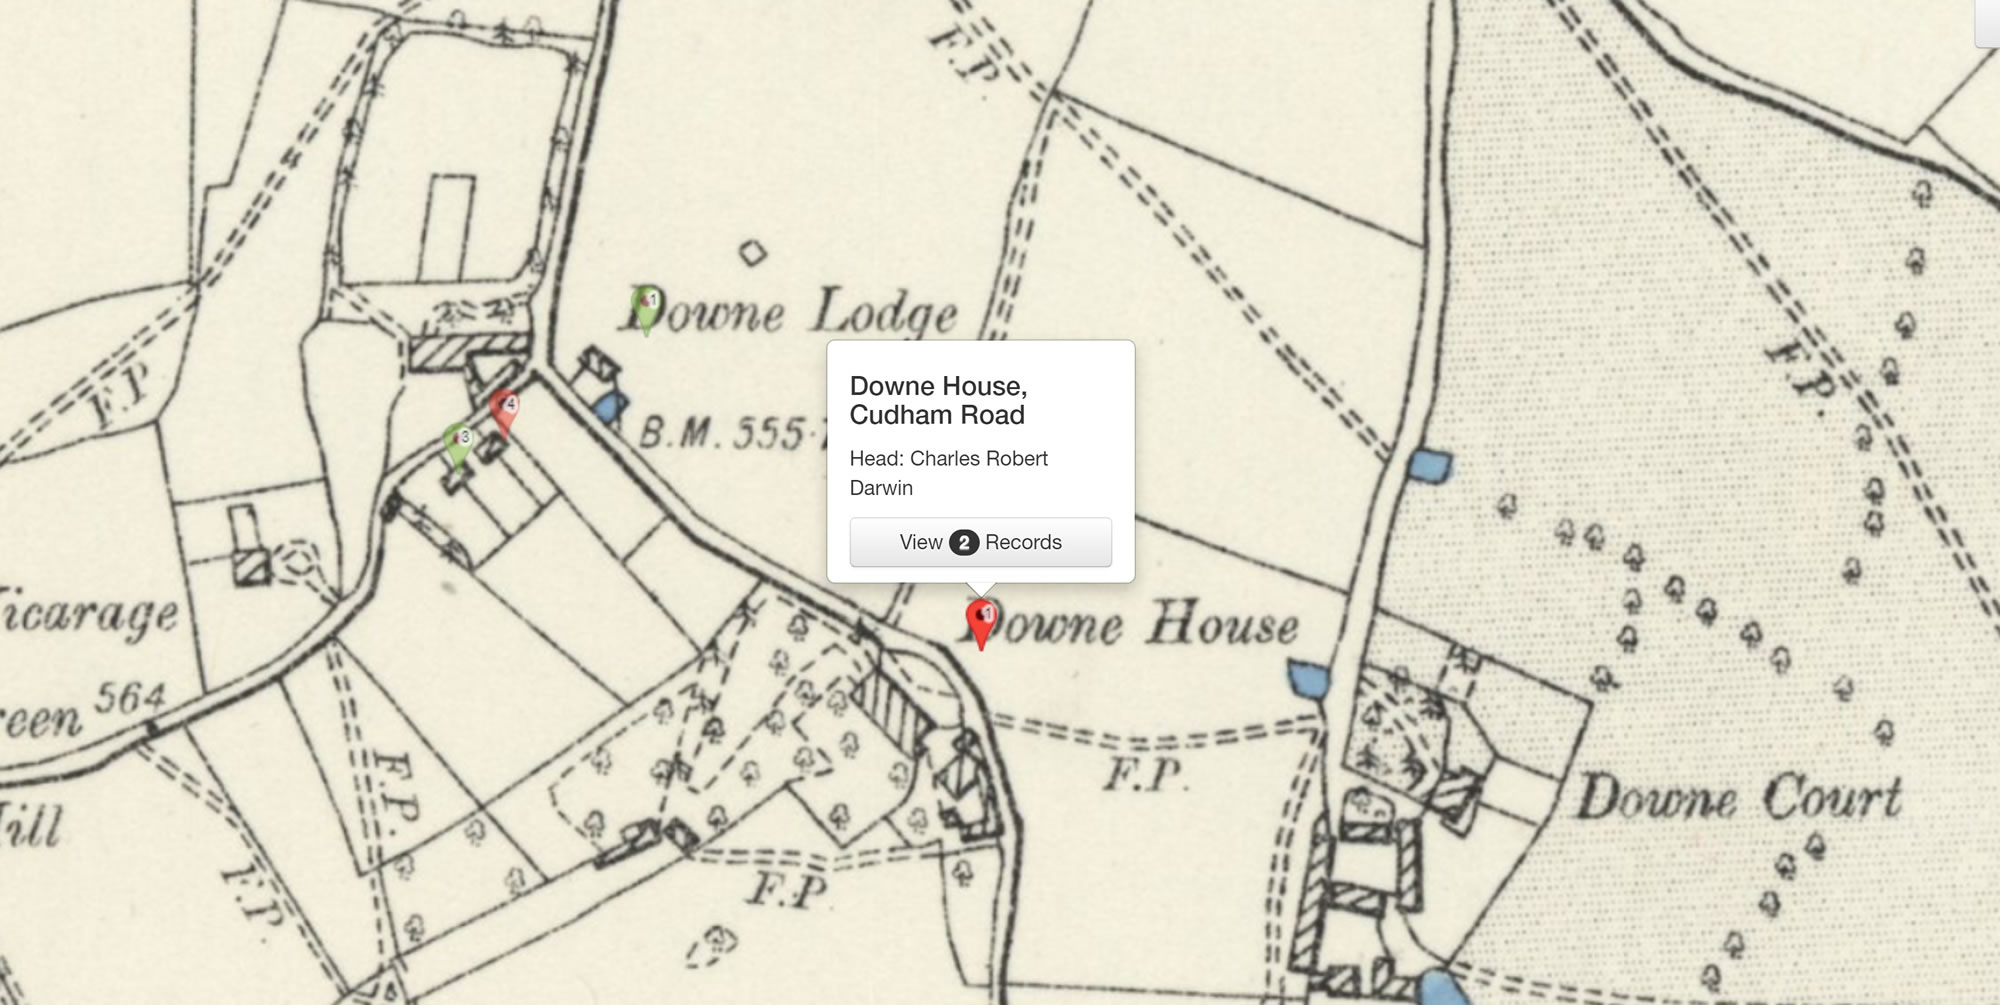 Census results on TheGenealogist pinpoints Darwin's home at Downe House in Kent